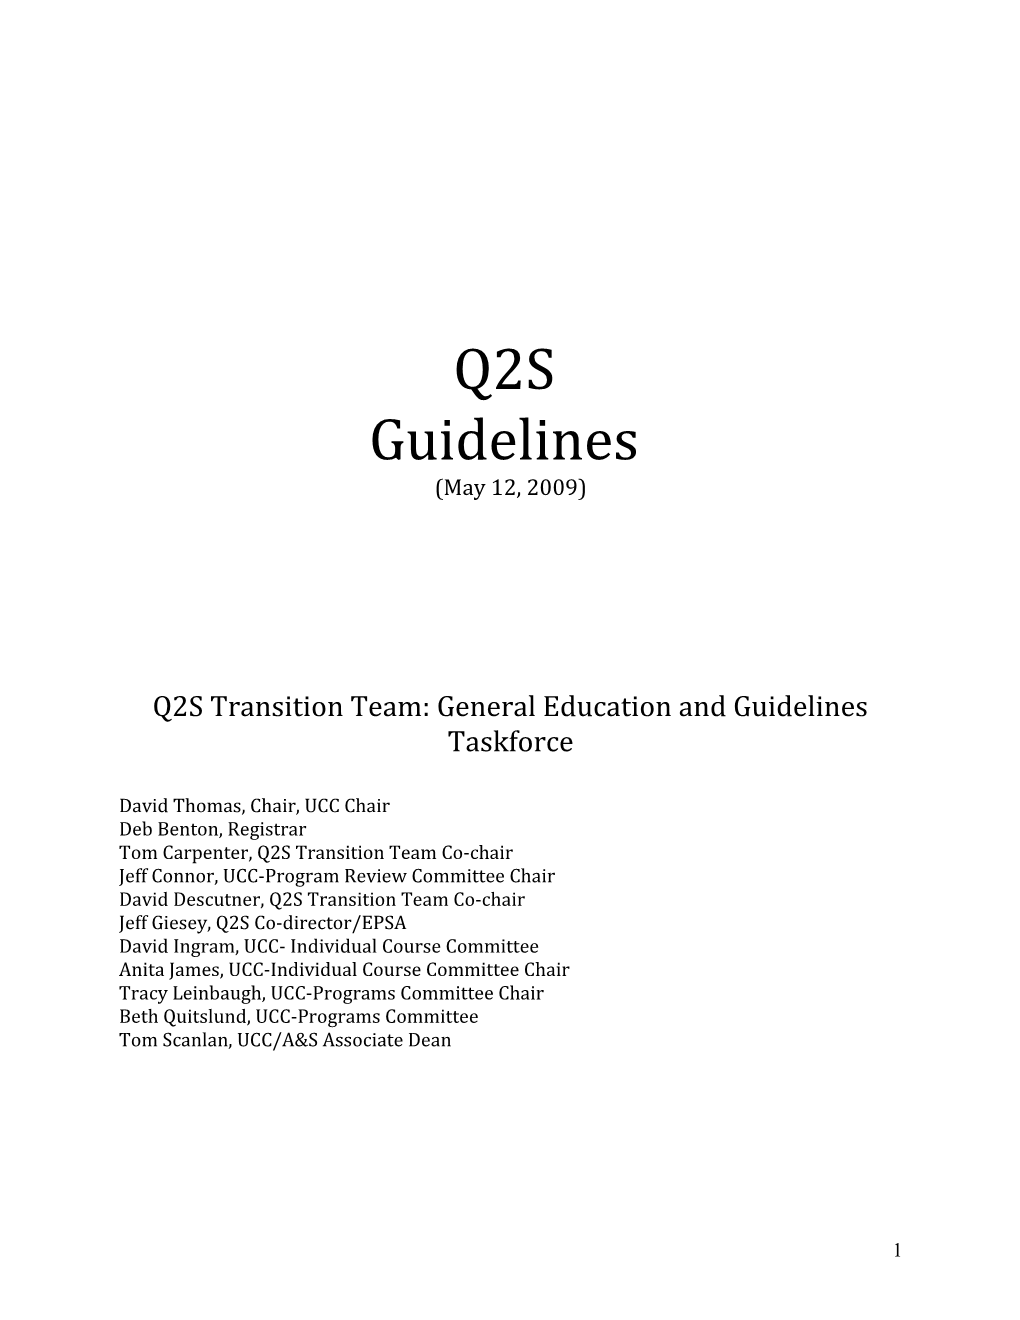 Guideline Table of Contents